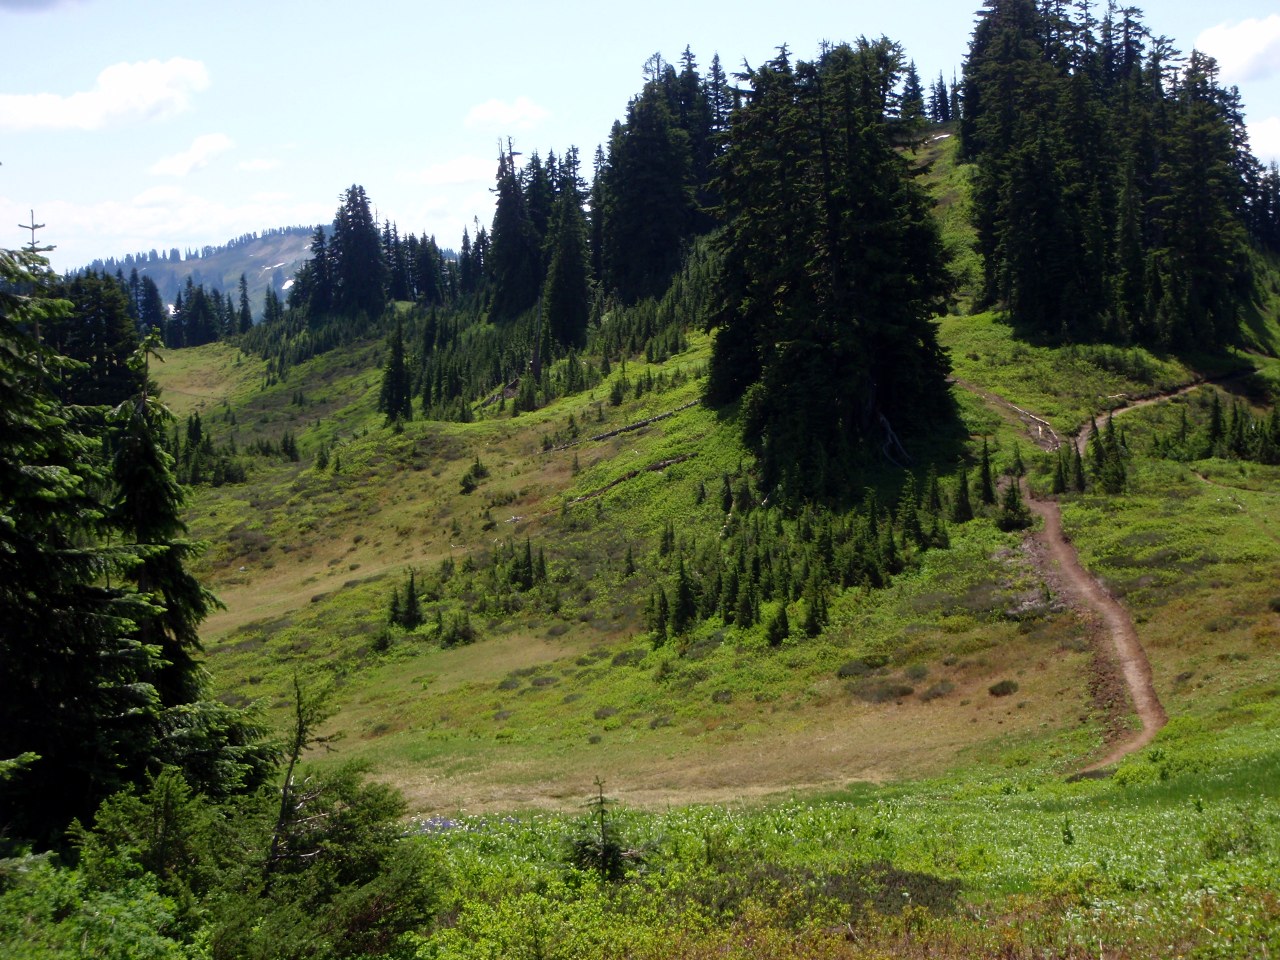 New trail down to Meander Meadow. Old trail followed ridge on S. side before dropping down to meadow.